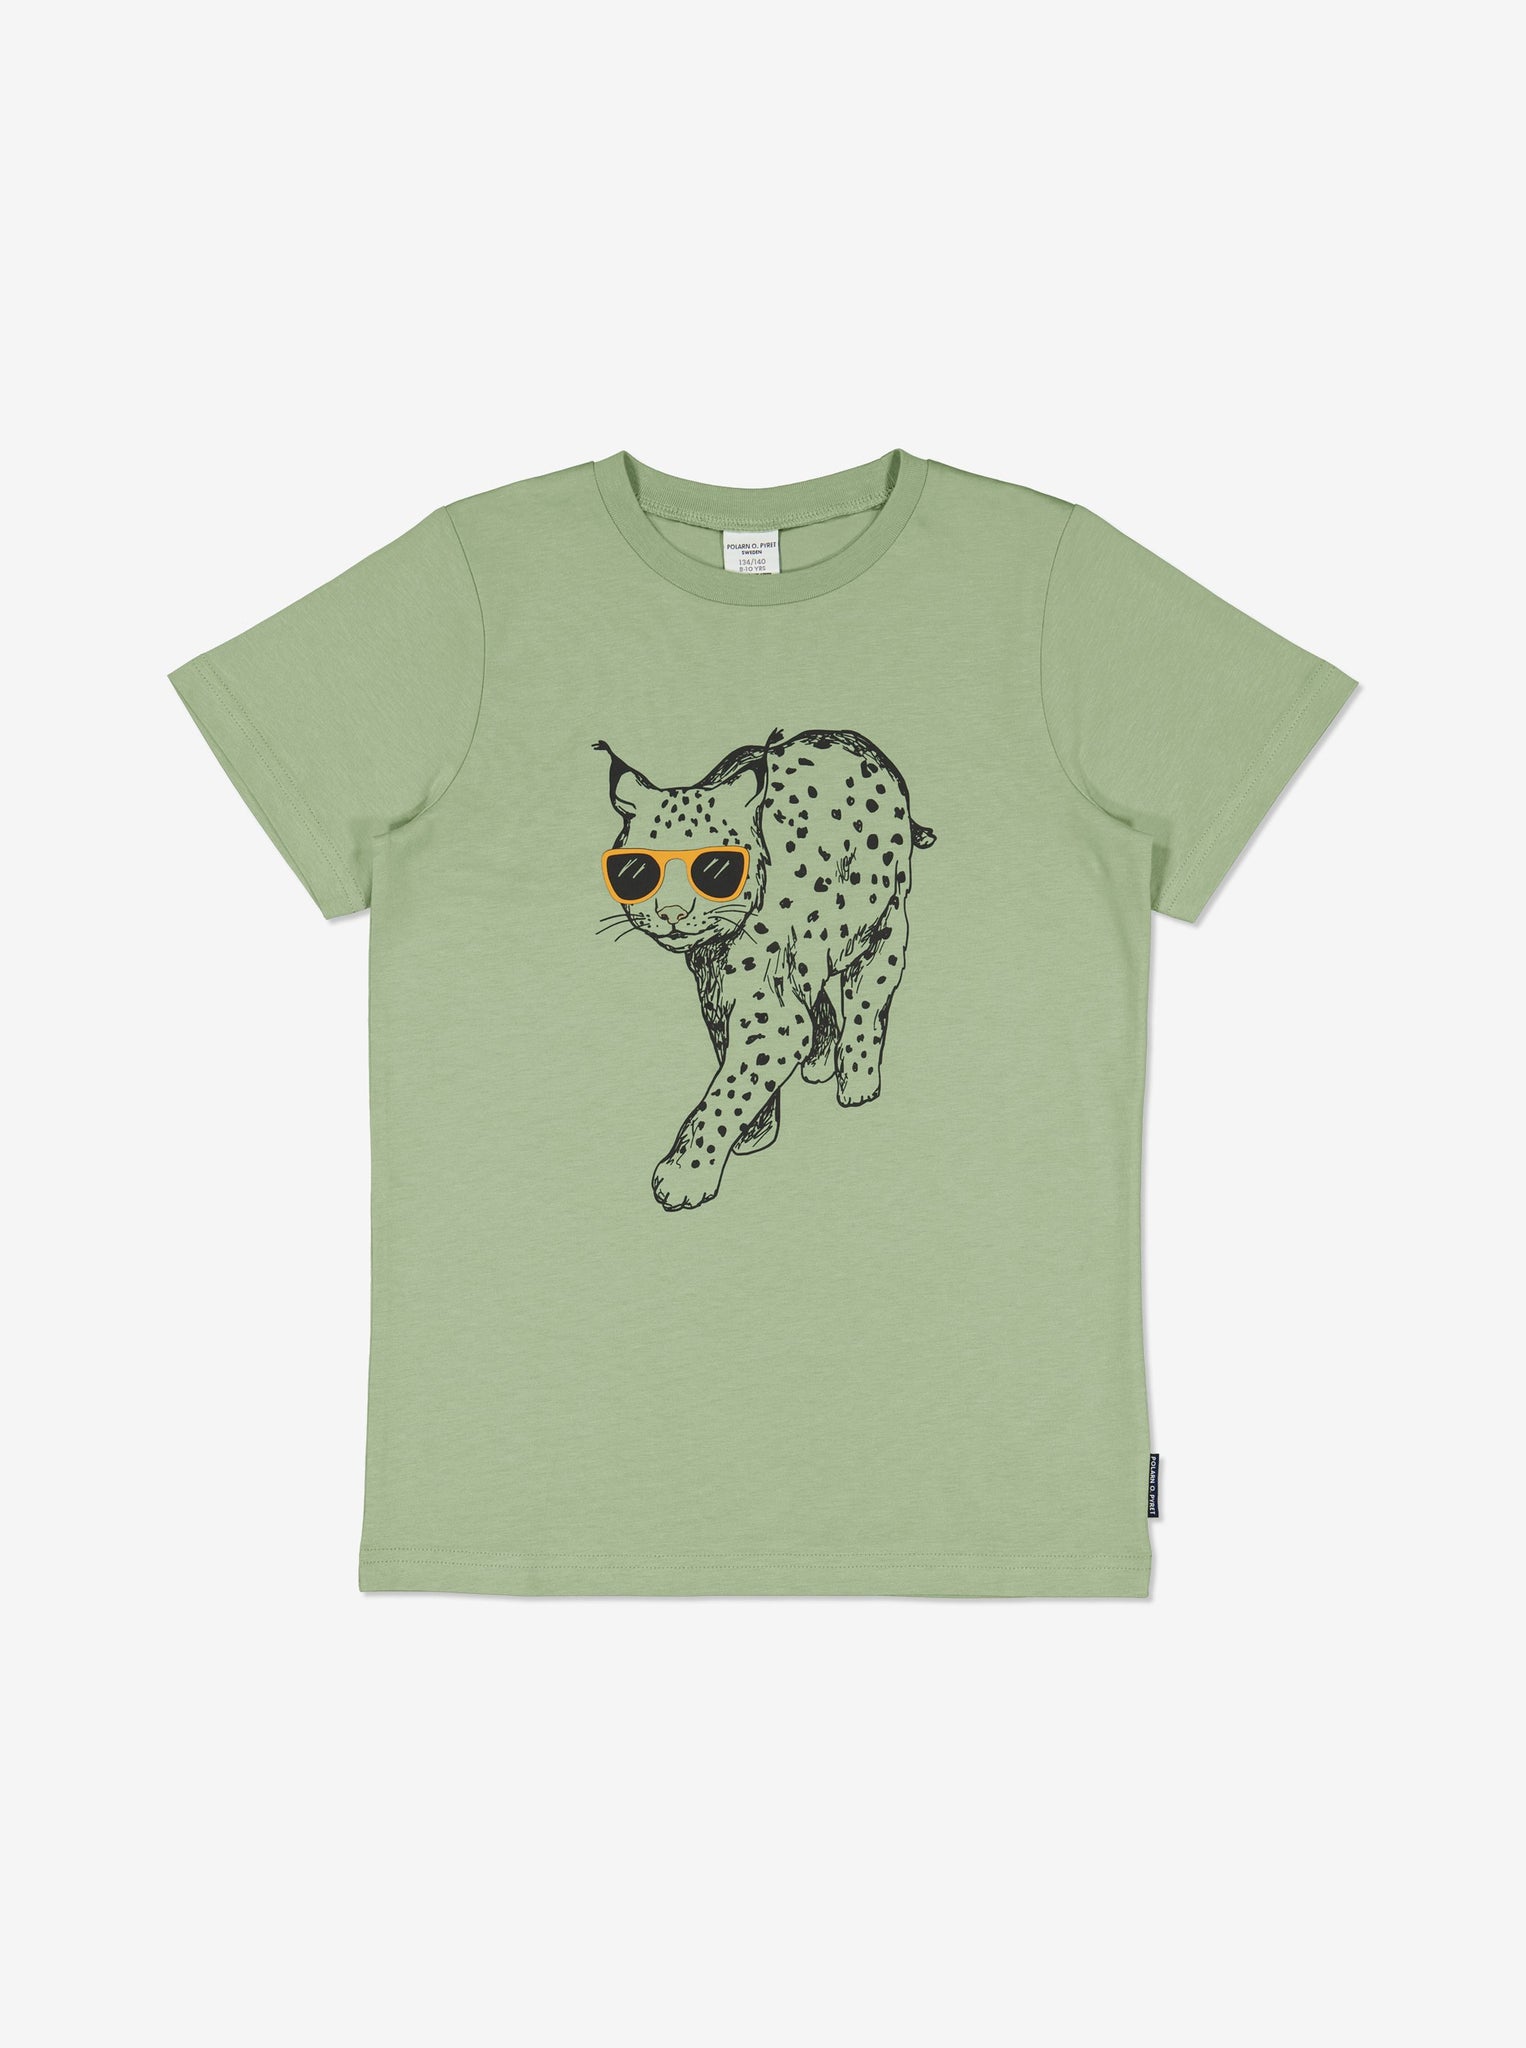  Green Cat Print  Kids T-Shirt from Polarn O. Pyret Kidswear. Made with 100% organic cotton.